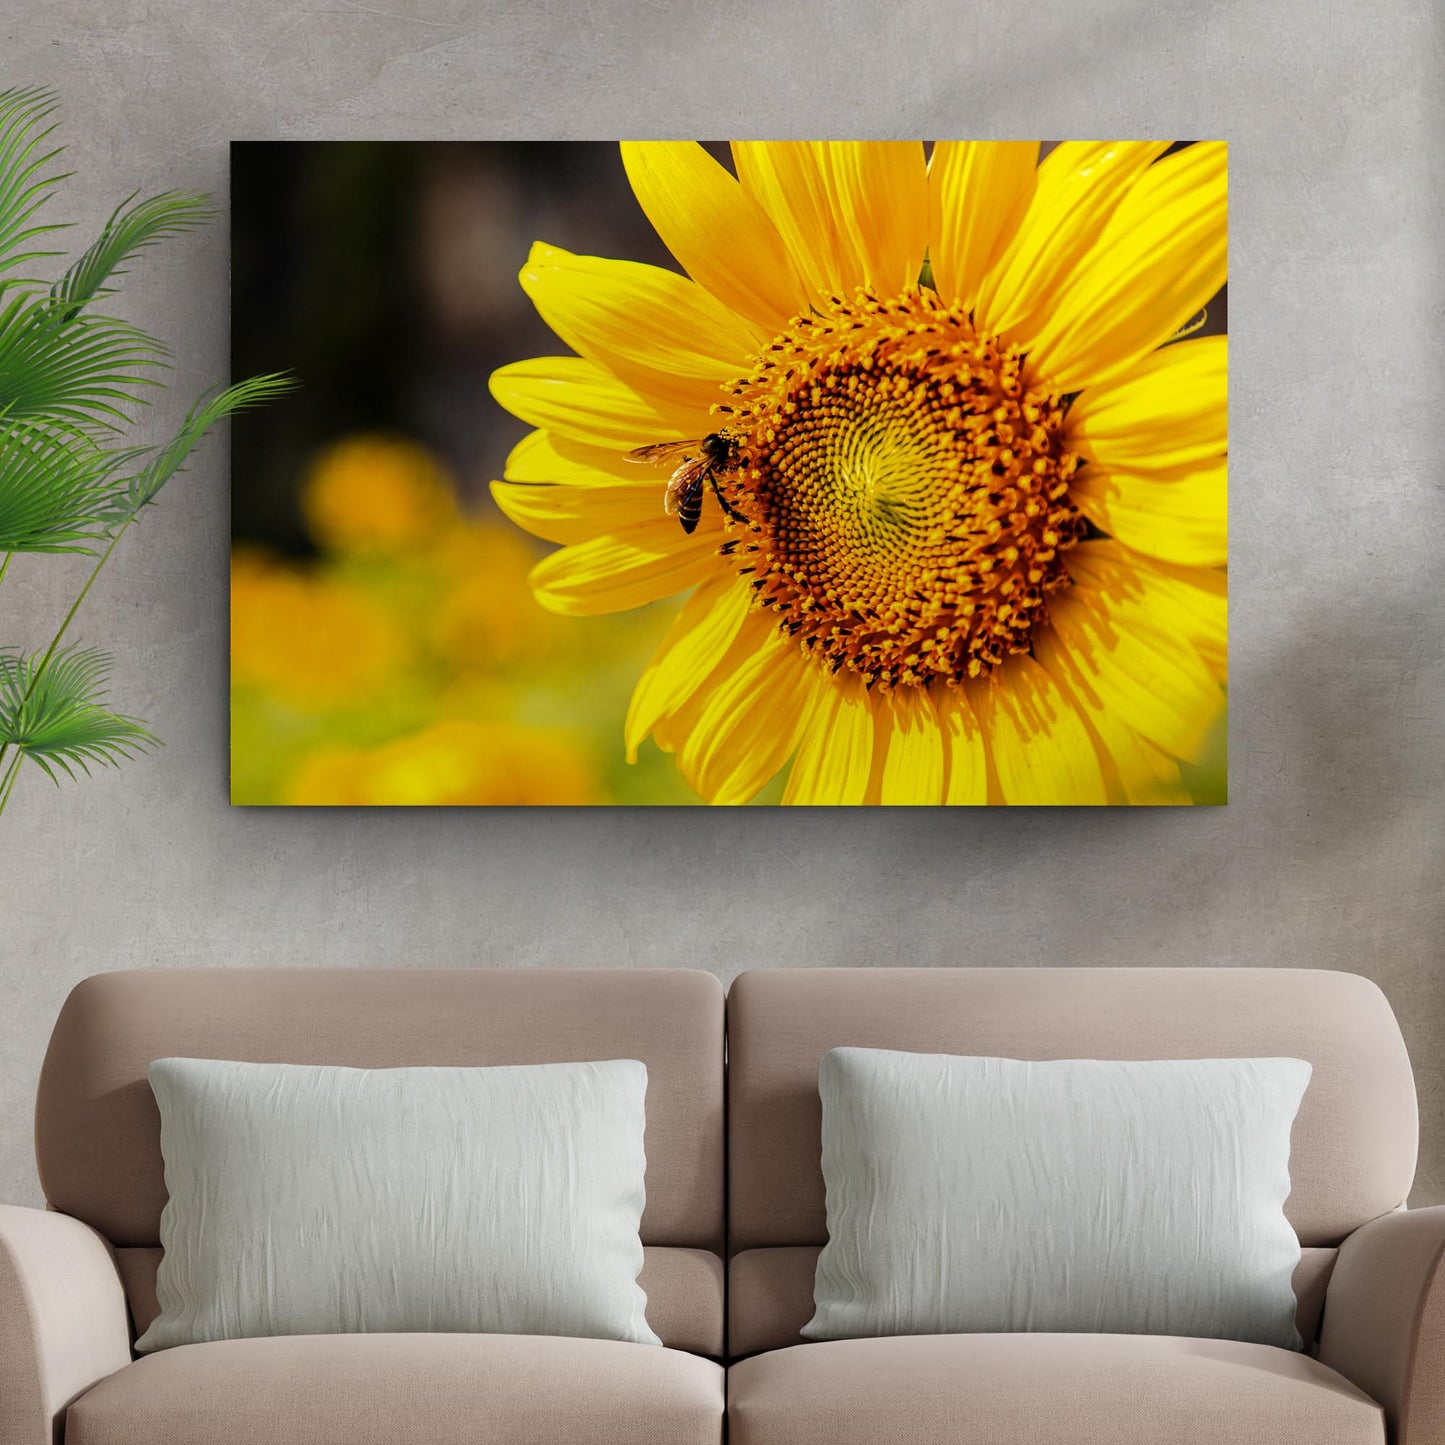 Bee On Sunflower Canvas Wall Art - Image by Tailored Canvases